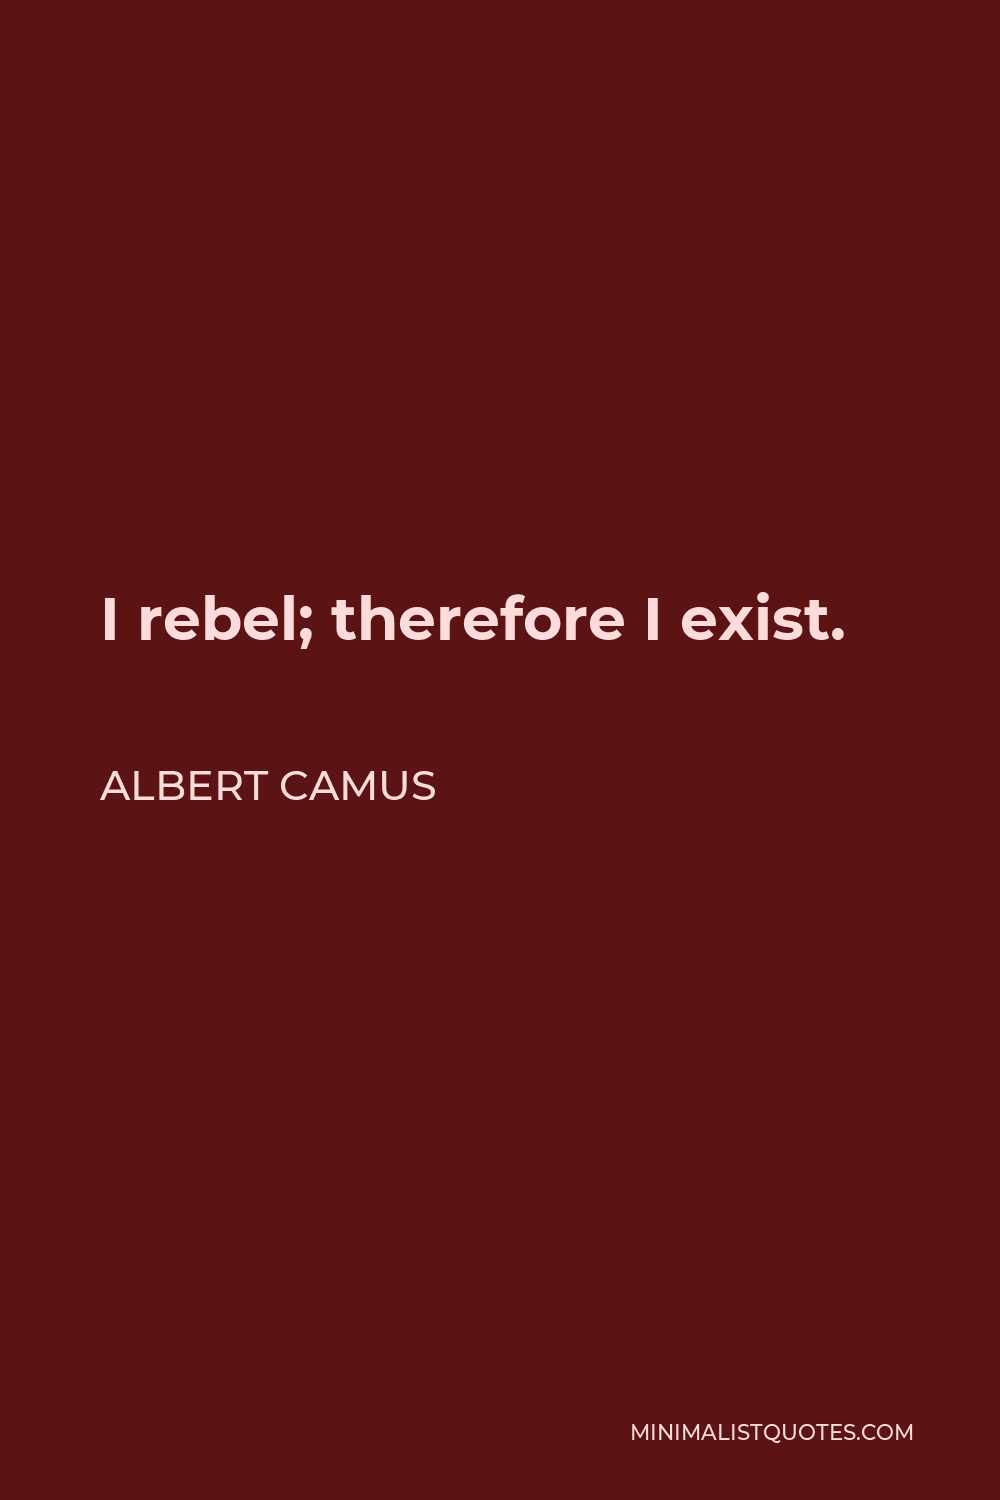 Albert Camus Quote - I rebel; therefore I exist.